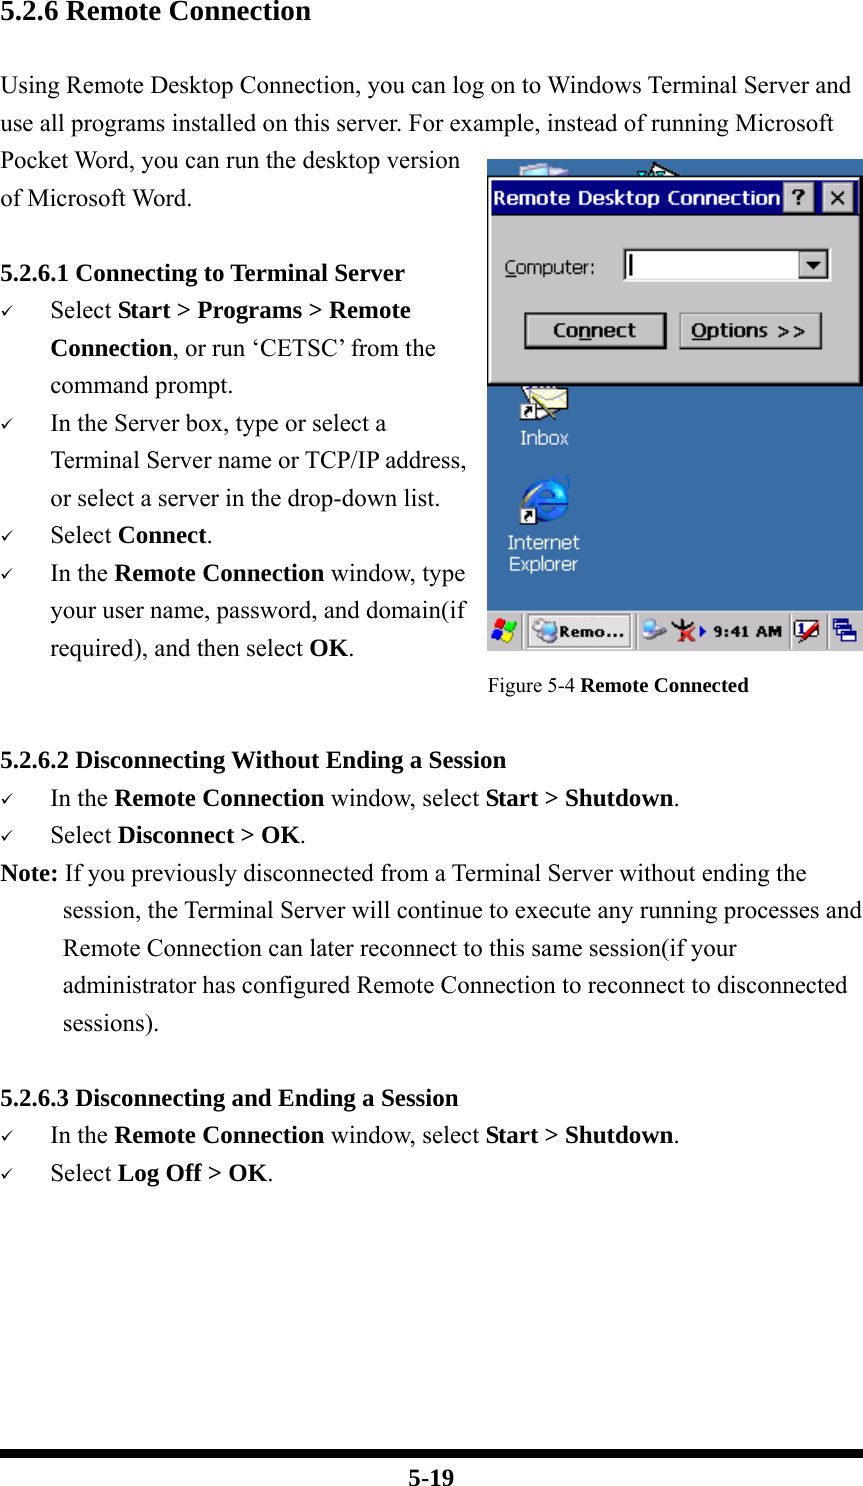  5-19 5.2.6 Remote Connection  Using Remote Desktop Connection, you can log on to Windows Terminal Server and use all programs installed on this server. For example, instead of running Microsoft Pocket Word, you can run the desktop version of Microsoft Word.  5.2.6.1 Connecting to Terminal Server 9 Select Start &gt; Programs &gt; Remote Connection, or run ‘CETSC’ from the command prompt. 9 In the Server box, type or select a Terminal Server name or TCP/IP address, or select a server in the drop-down list. 9 Select Connect. 9 In the Remote Connection window, type your user name, password, and domain(if required), and then select OK.                                        Figure 5-4 Remote Connected  5.2.6.2 Disconnecting Without Ending a Session 9 In the Remote Connection window, select Start &gt; Shutdown. 9 Select Disconnect &gt; OK. Note: If you previously disconnected from a Terminal Server without ending the session, the Terminal Server will continue to execute any running processes and Remote Connection can later reconnect to this same session(if your administrator has configured Remote Connection to reconnect to disconnected sessions).  5.2.6.3 Disconnecting and Ending a Session 9 In the Remote Connection window, select Start &gt; Shutdown. 9 Select Log Off &gt; OK.      